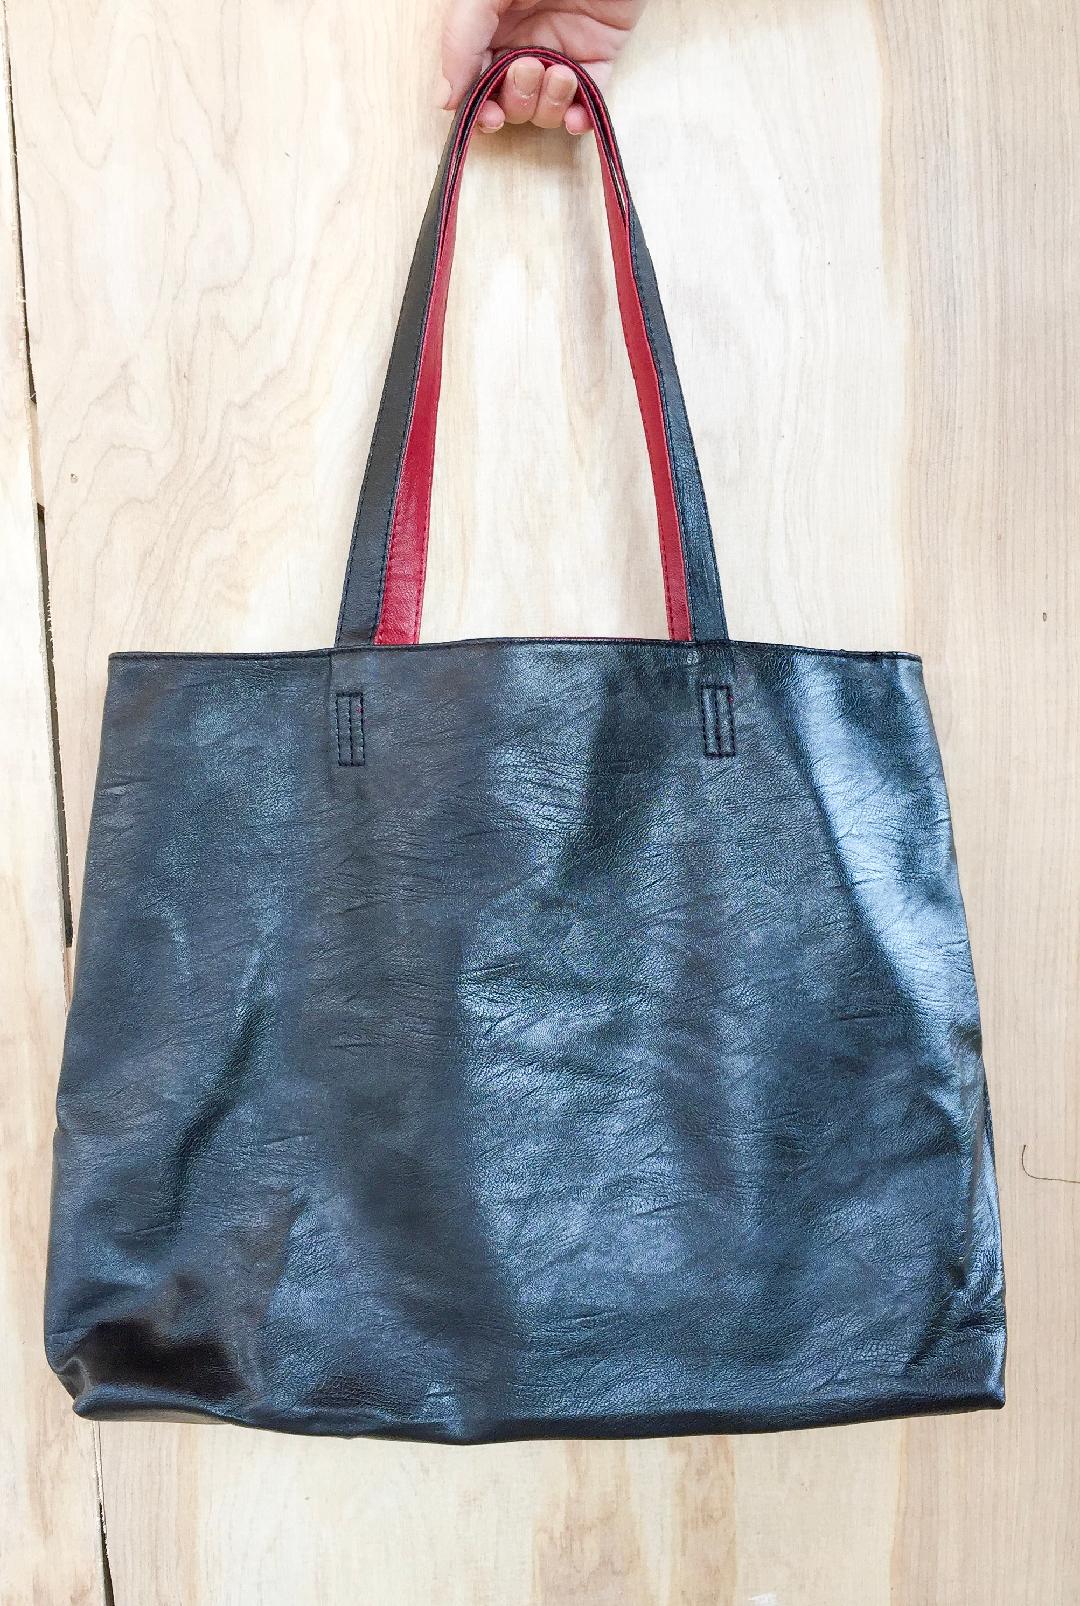 Better Than One Bag in Black and Red - Giddy Up Glamour Boutique